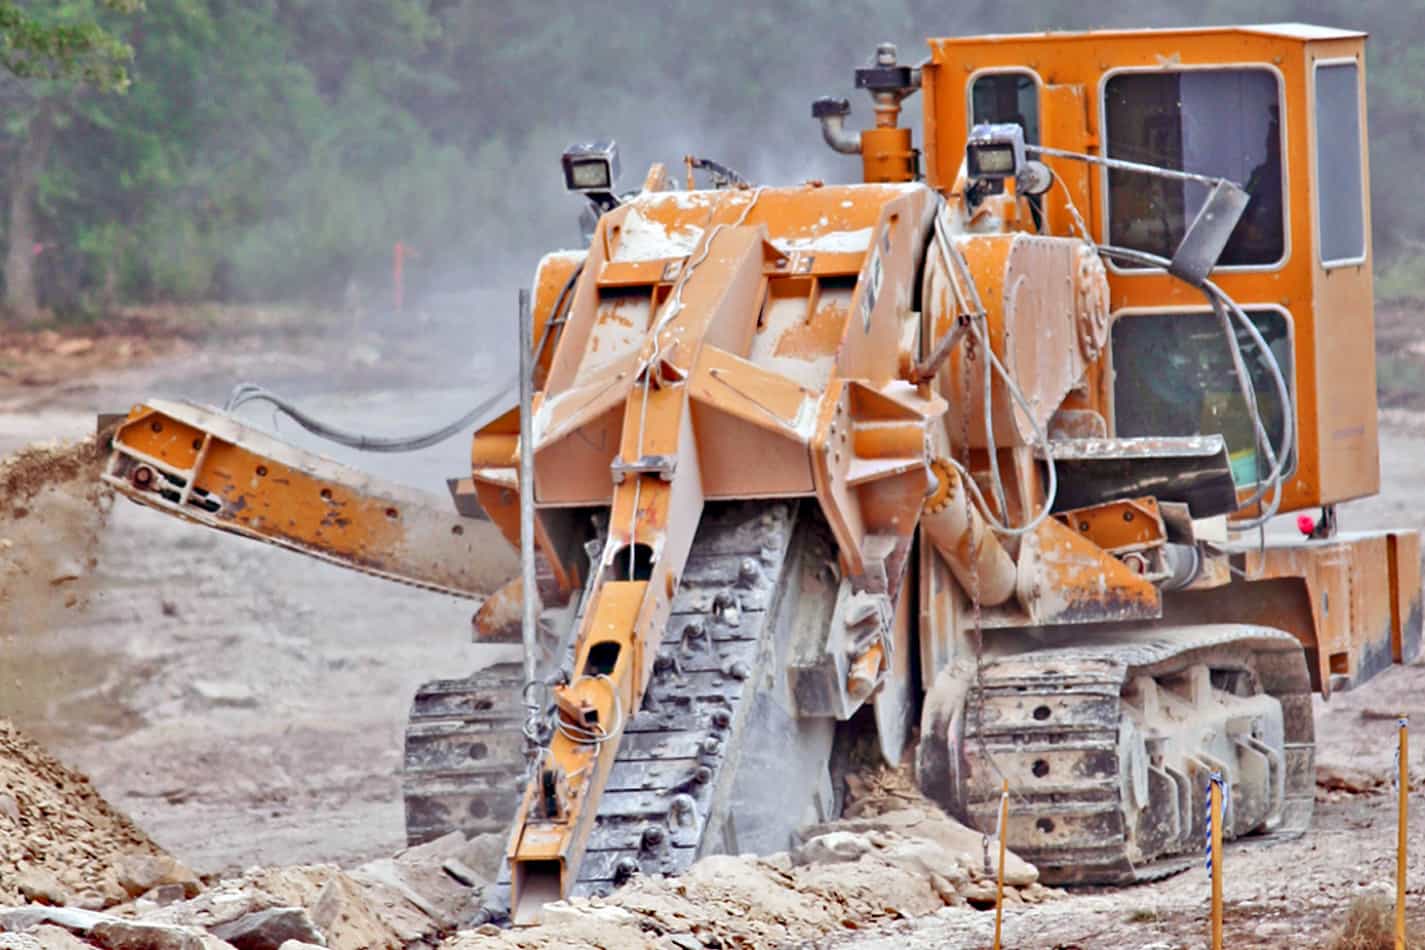 Trenching Safety in the Rain: What You Need to Consider